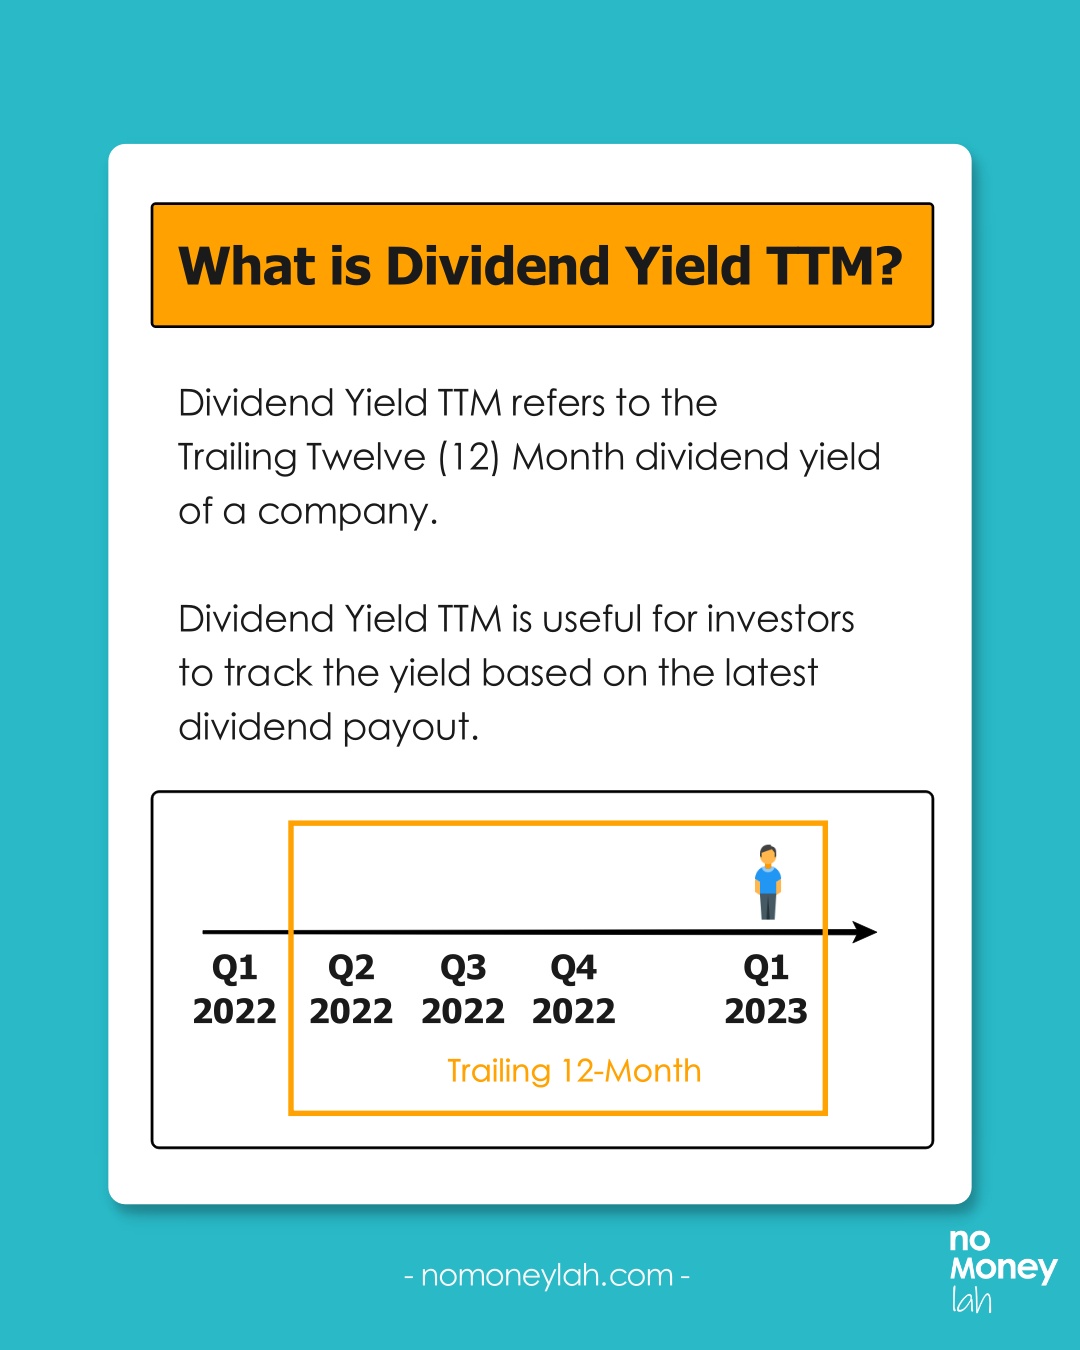 What is Dividend Yield TTM